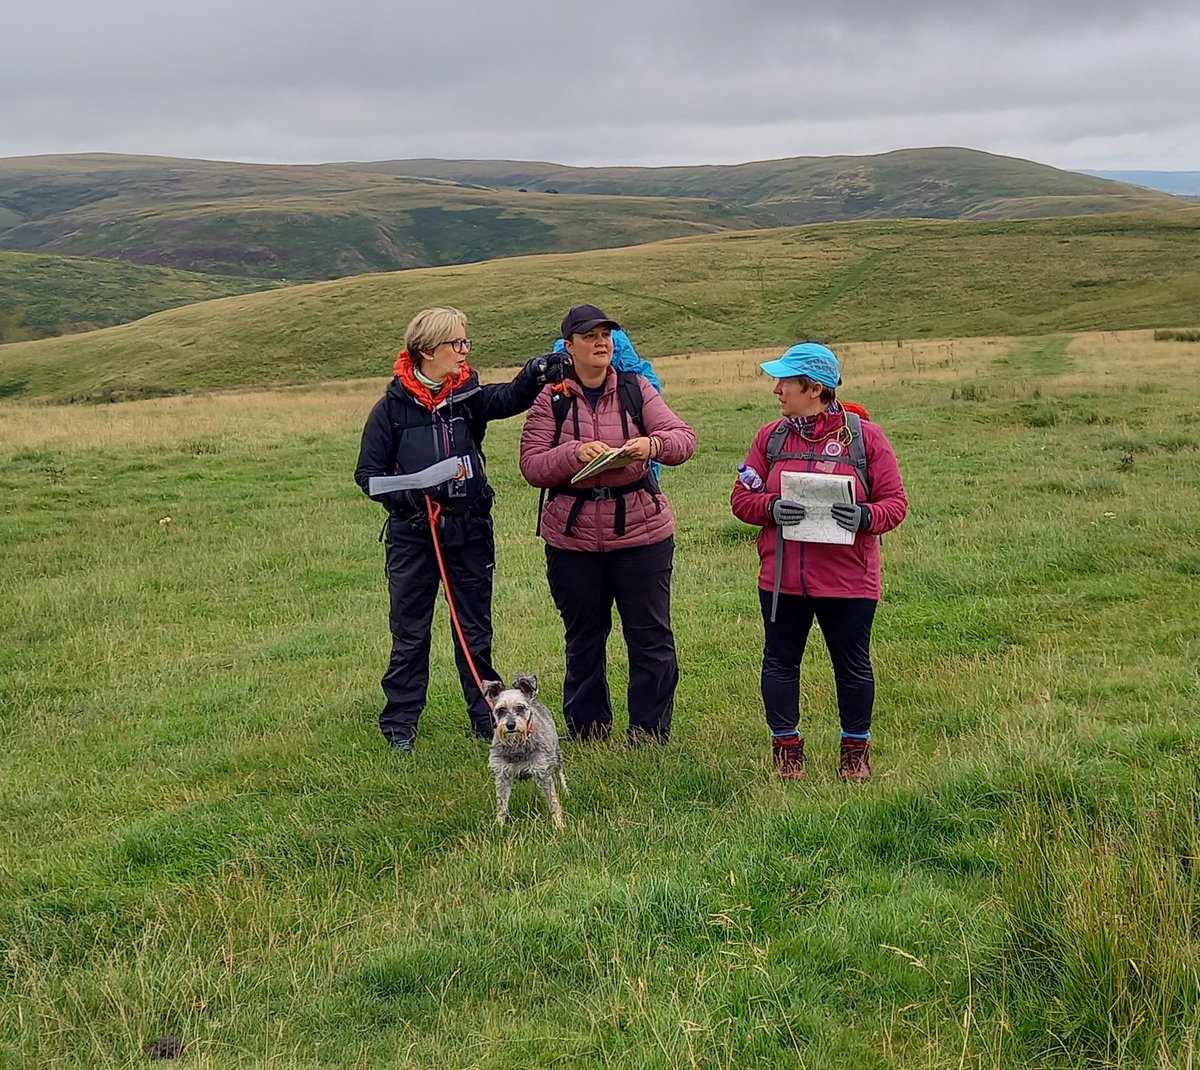 Great weekend running a Silver @nnas_uk Course in the Cheviots. 
#navigatewithconfidence #skillsforthehills #northumberland #northeast #northumberlandnationalpark